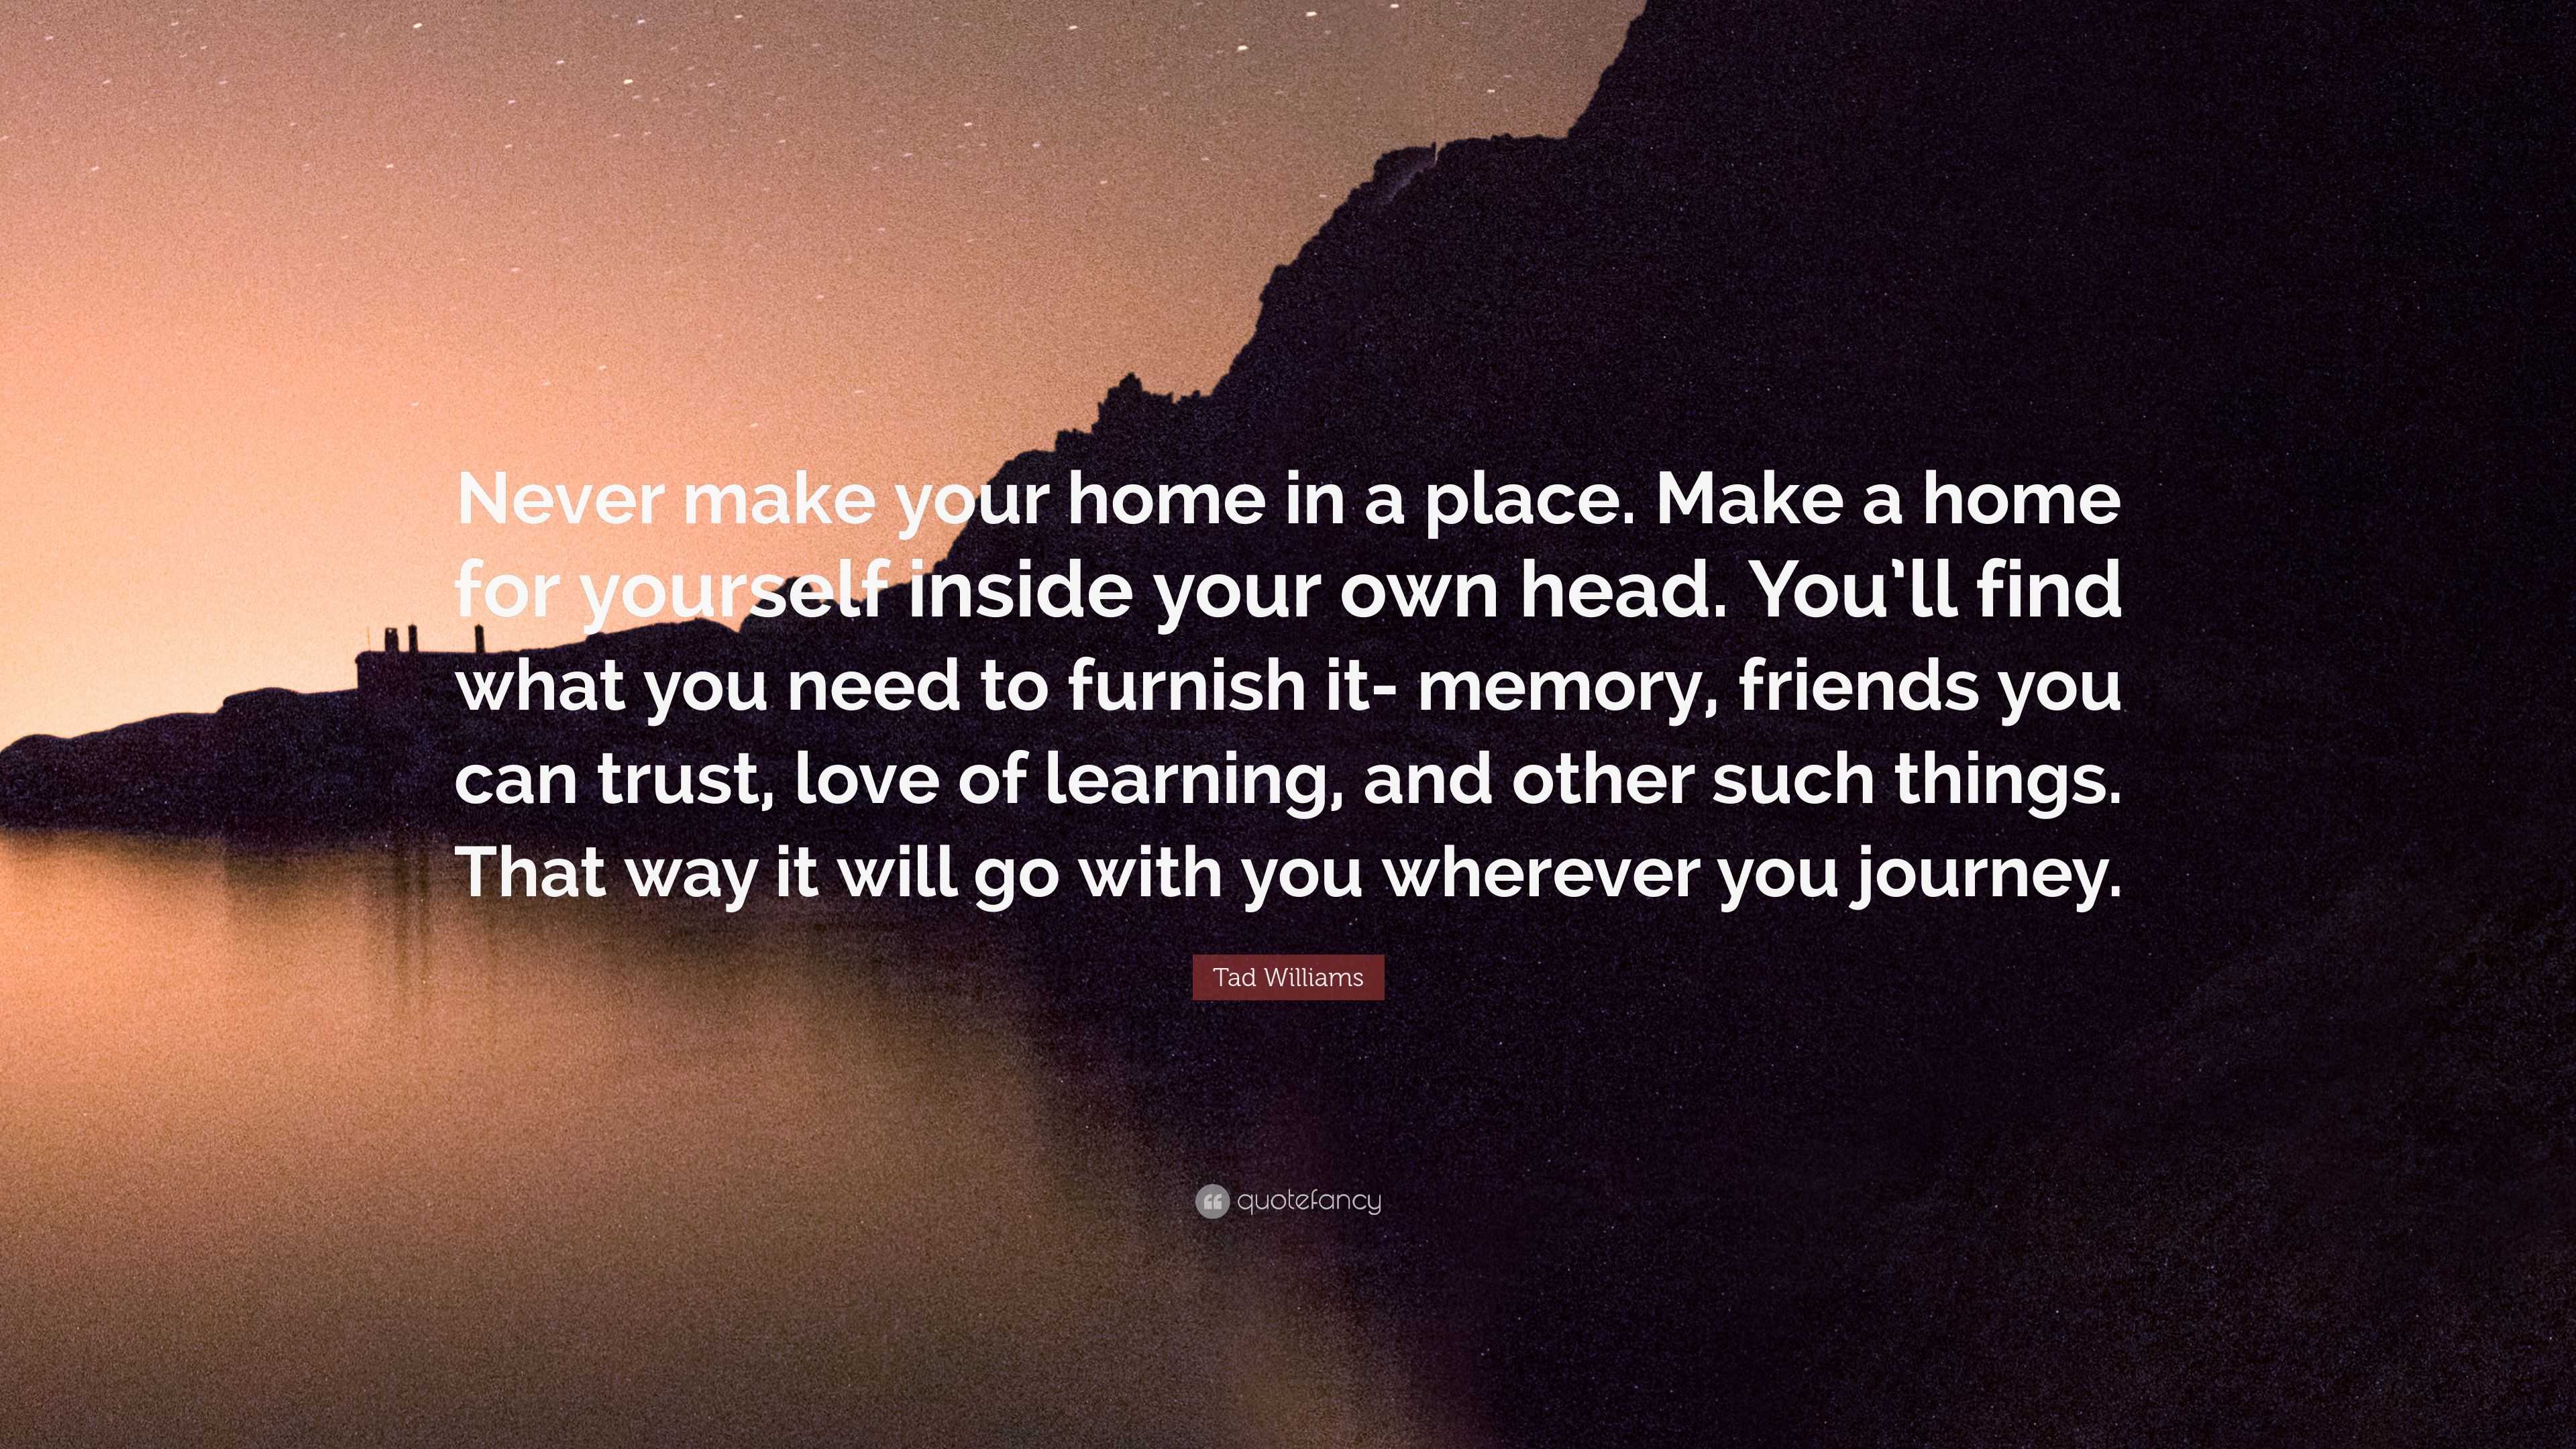 Tad Williams Quote “Never make your home in a place Make a home